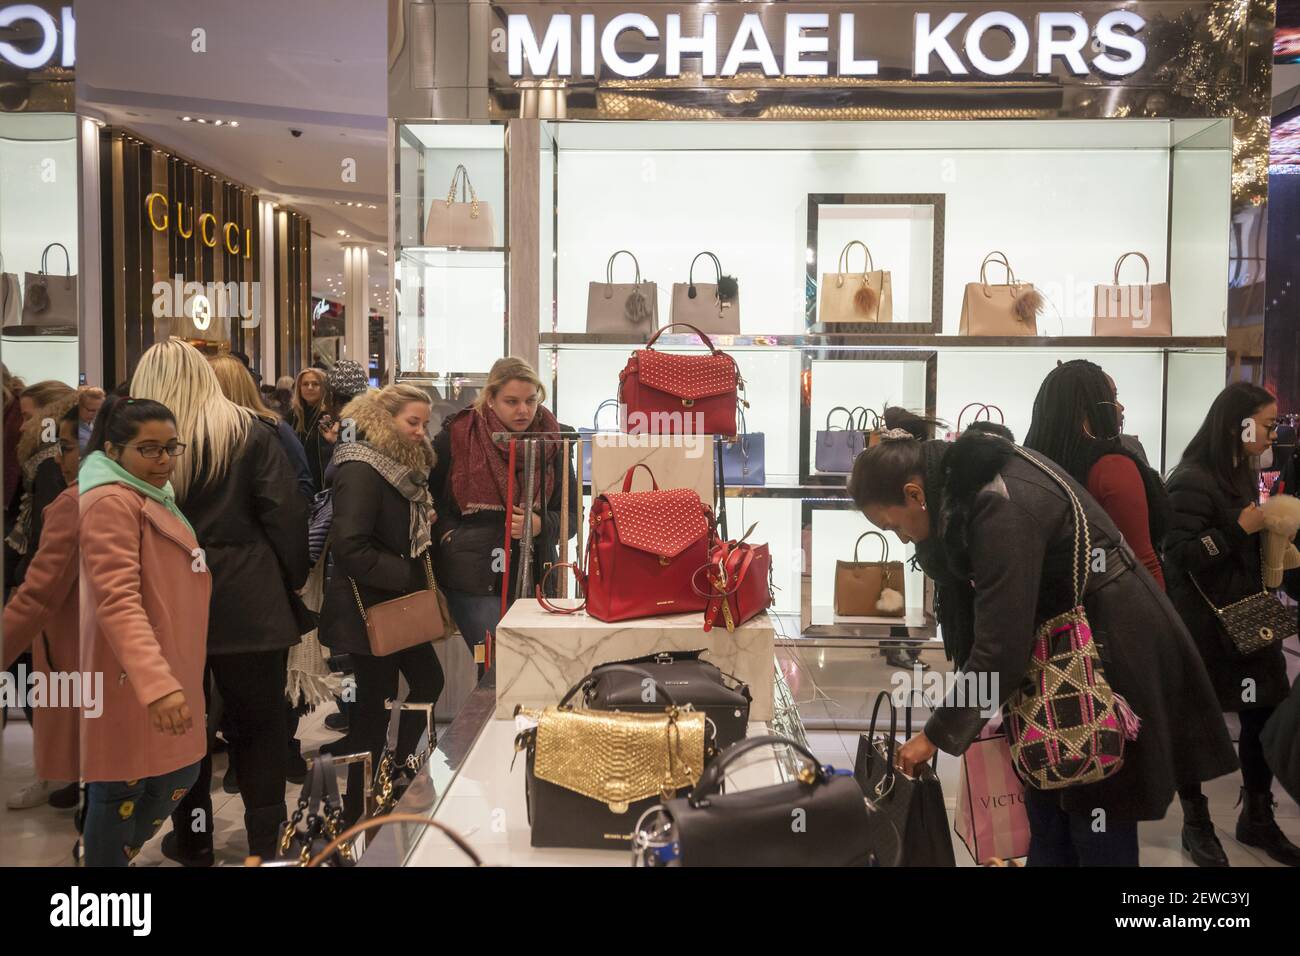 Hordes of shoppers throng the Michael Kors display at Macy's Herald Square  flagship store in New York on the day after Thanksgiving, Black Friday,  November 24, 2017. Michael Kors Holdings Ltd. announced